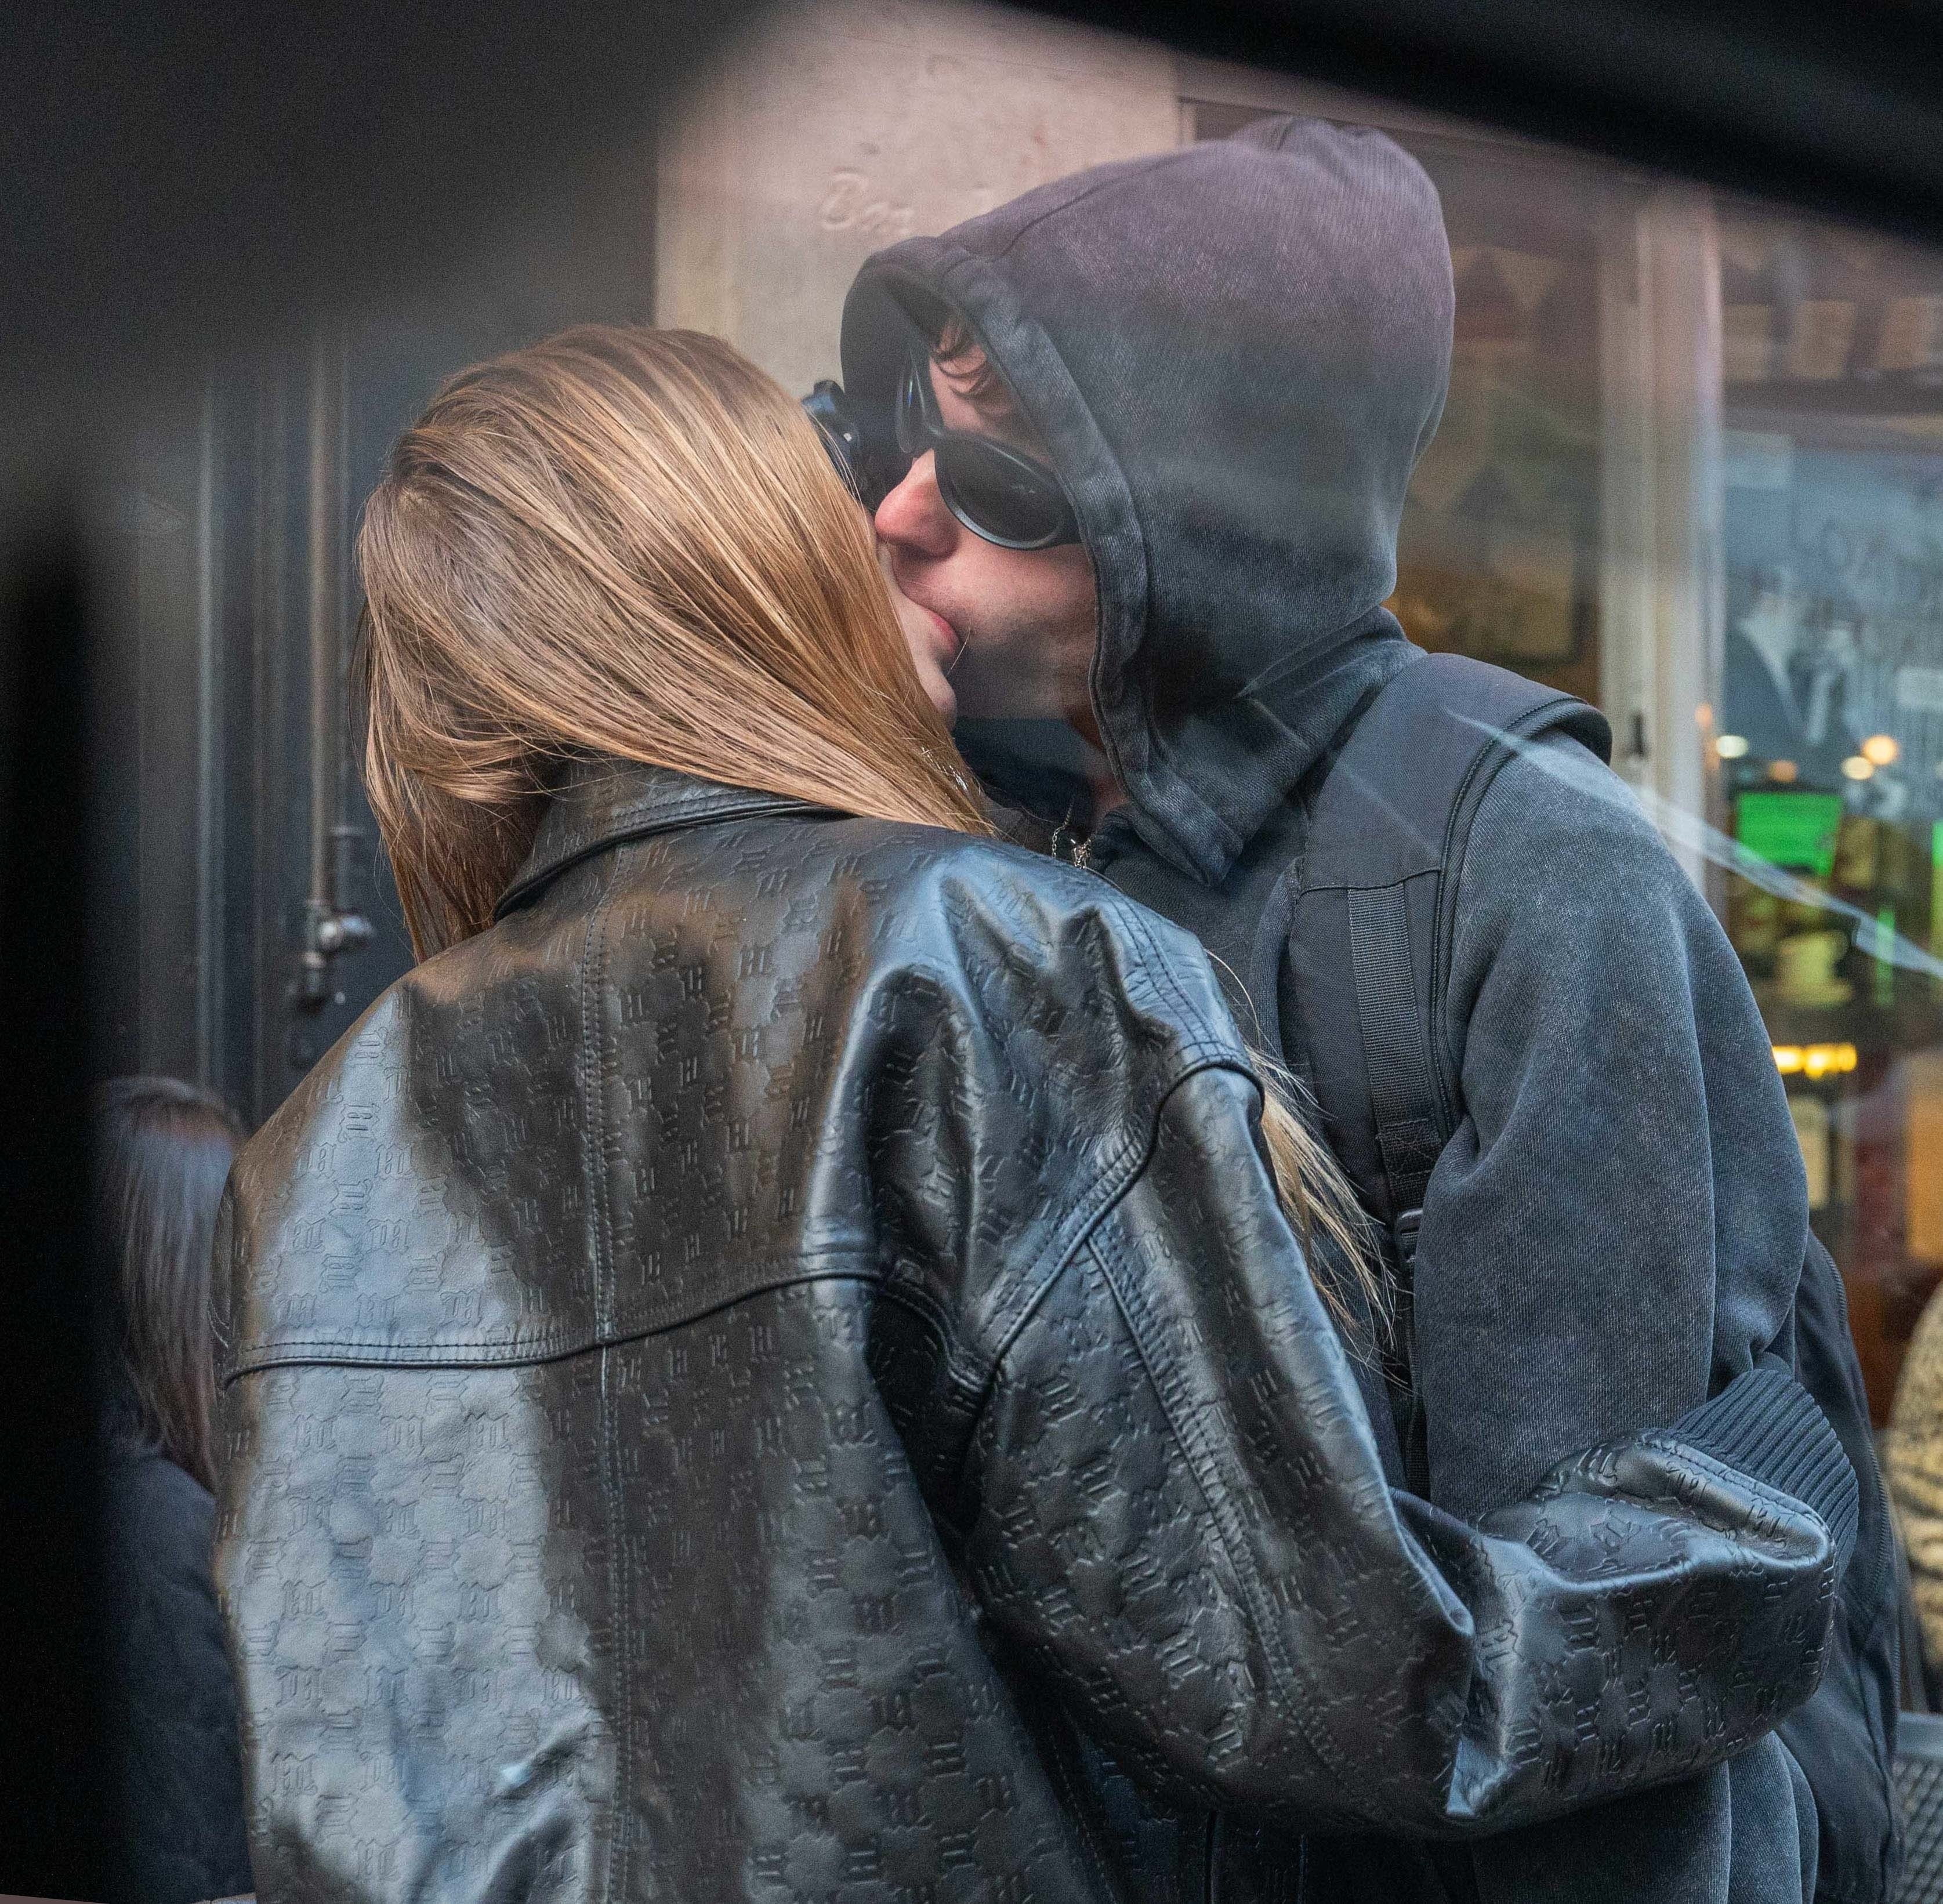 Liam Gallagher and Patsy Kensit's son, Lennon Gallagher, 24, was spotted kissing Mila Rowyszyn